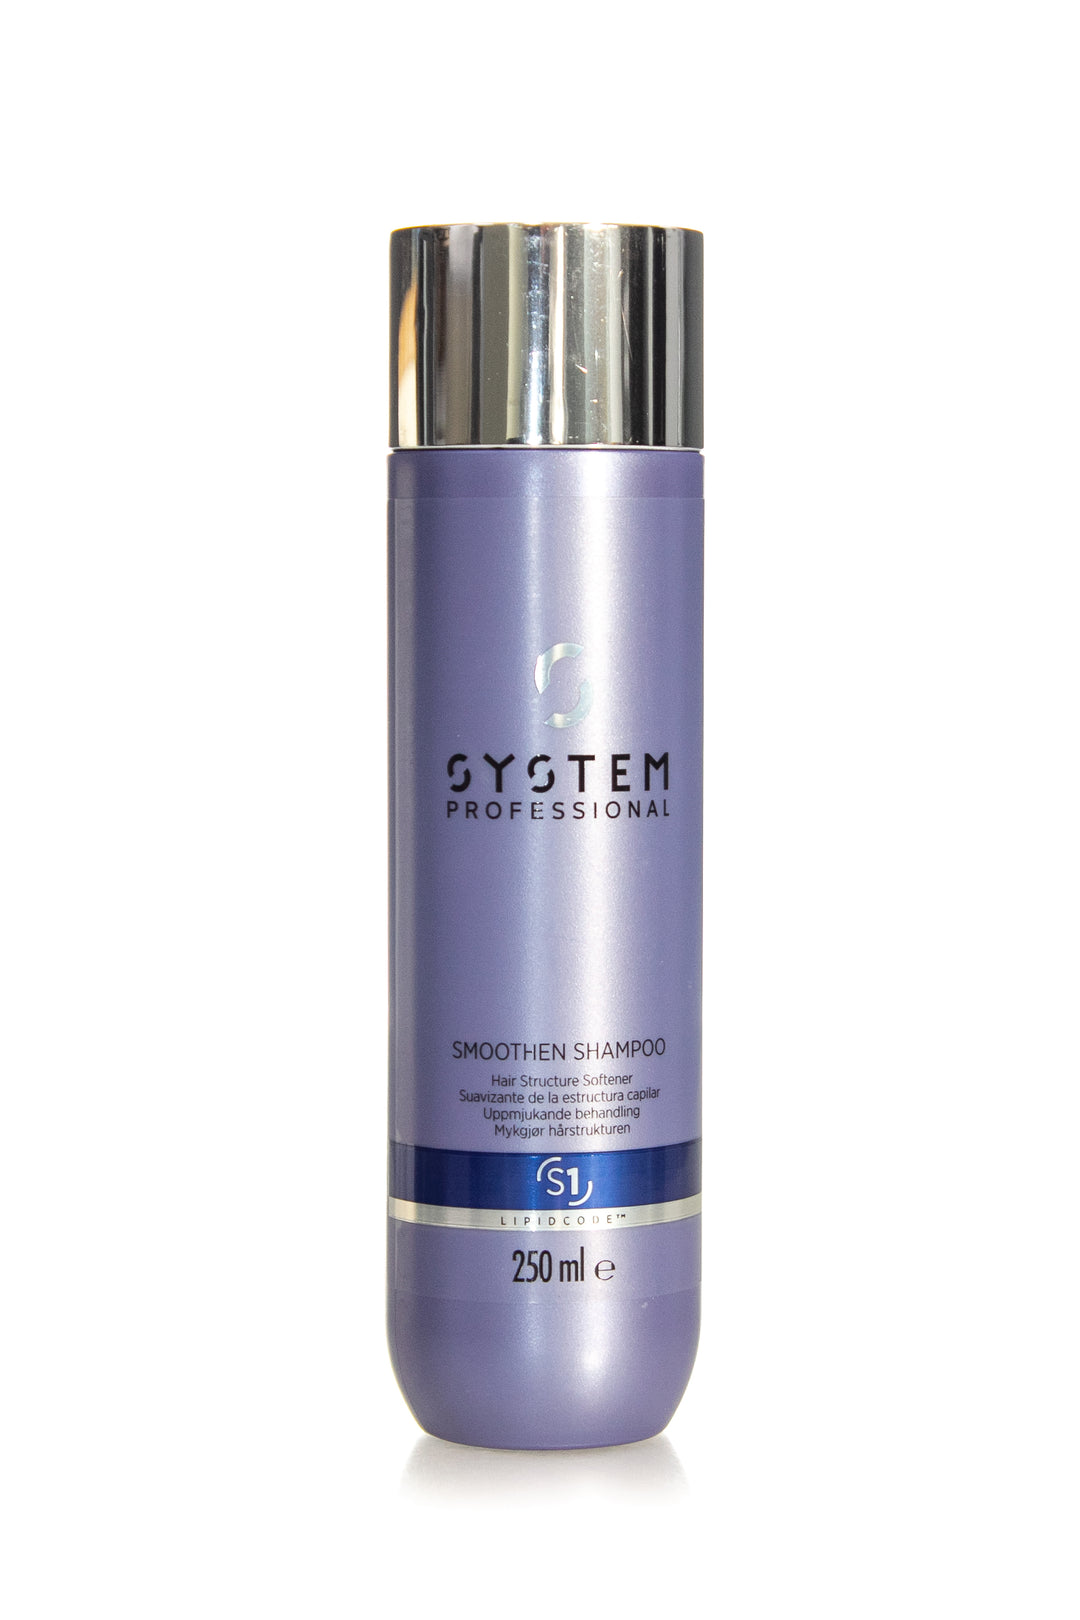 SYSTEM PROFESSIONAL Smoothen Shampoo  | 250ml